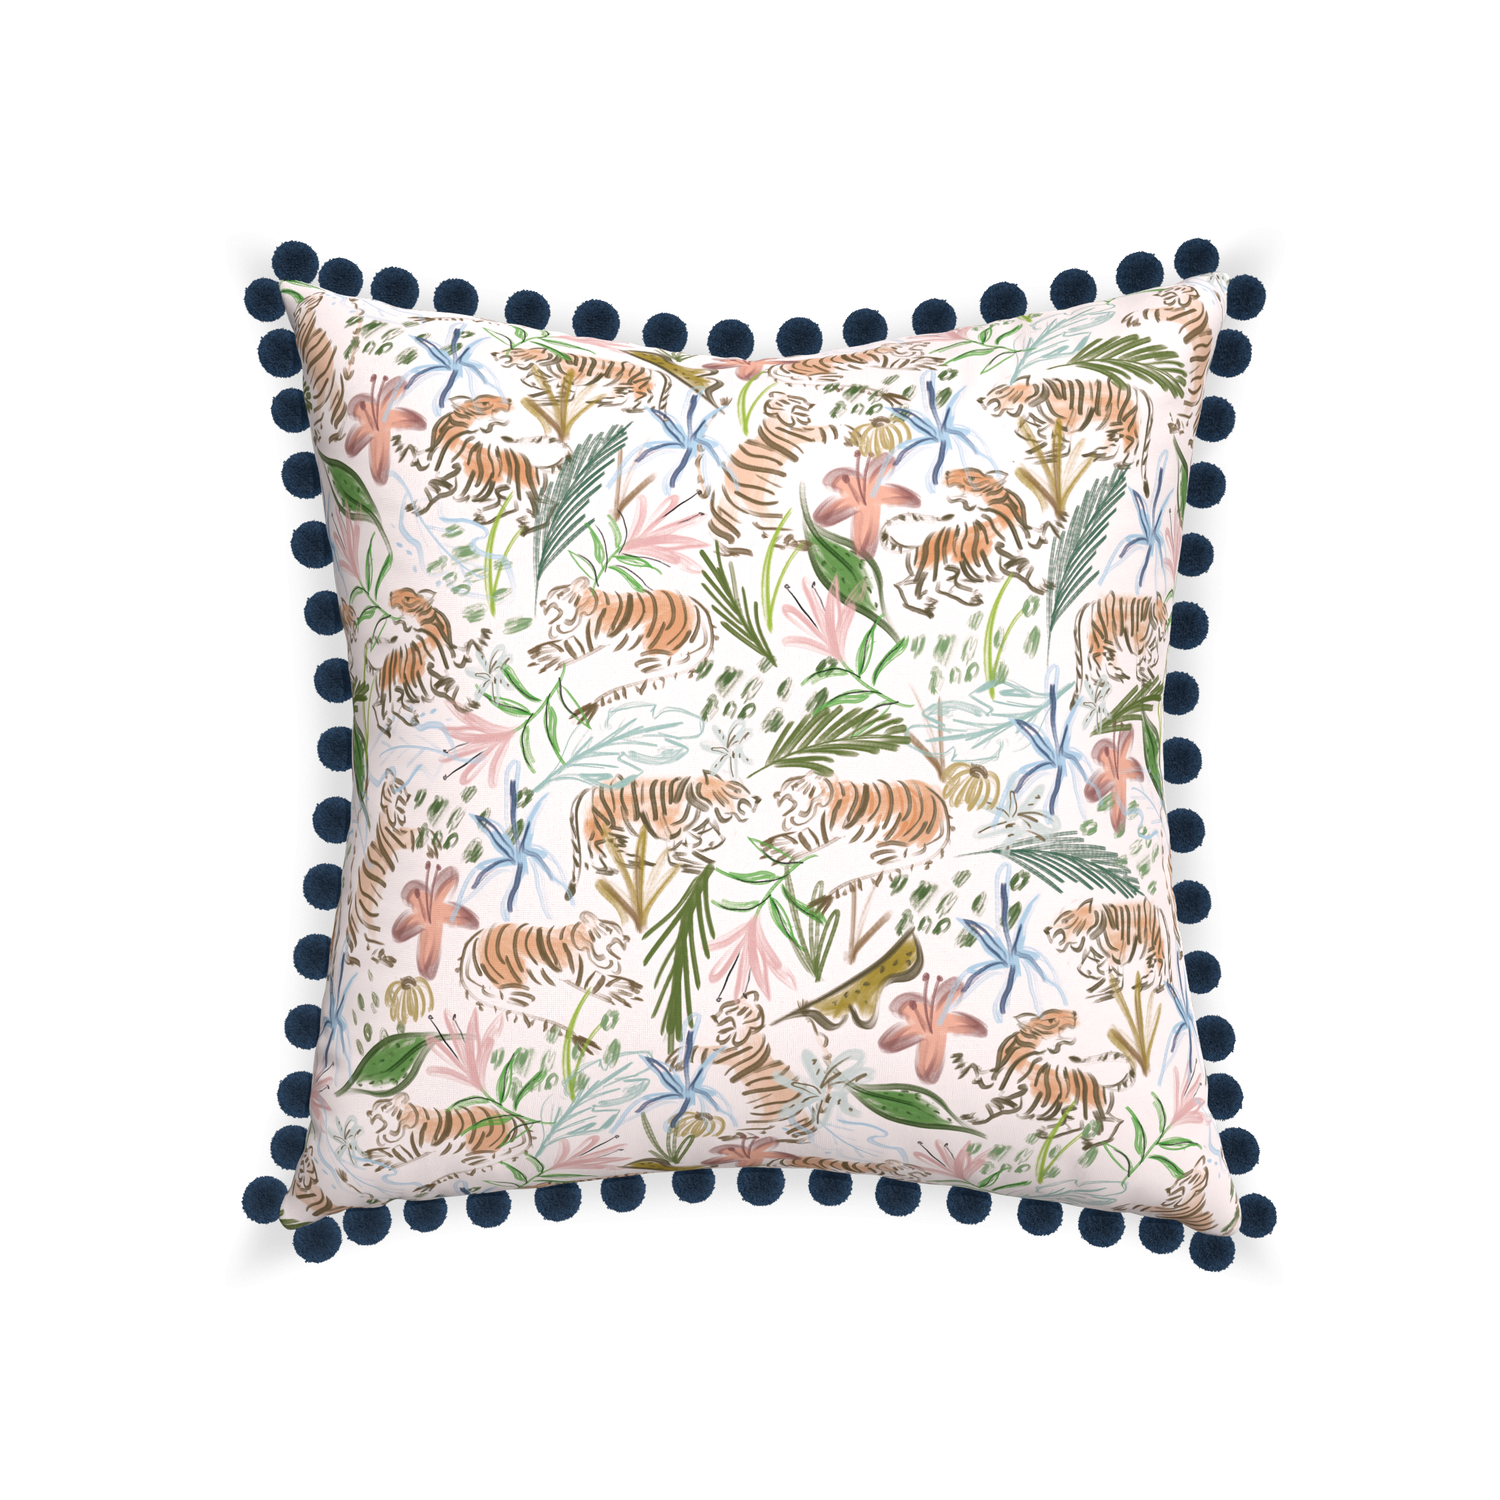 22-square frida pink custom pink chinoiserie tigerpillow with c on white background